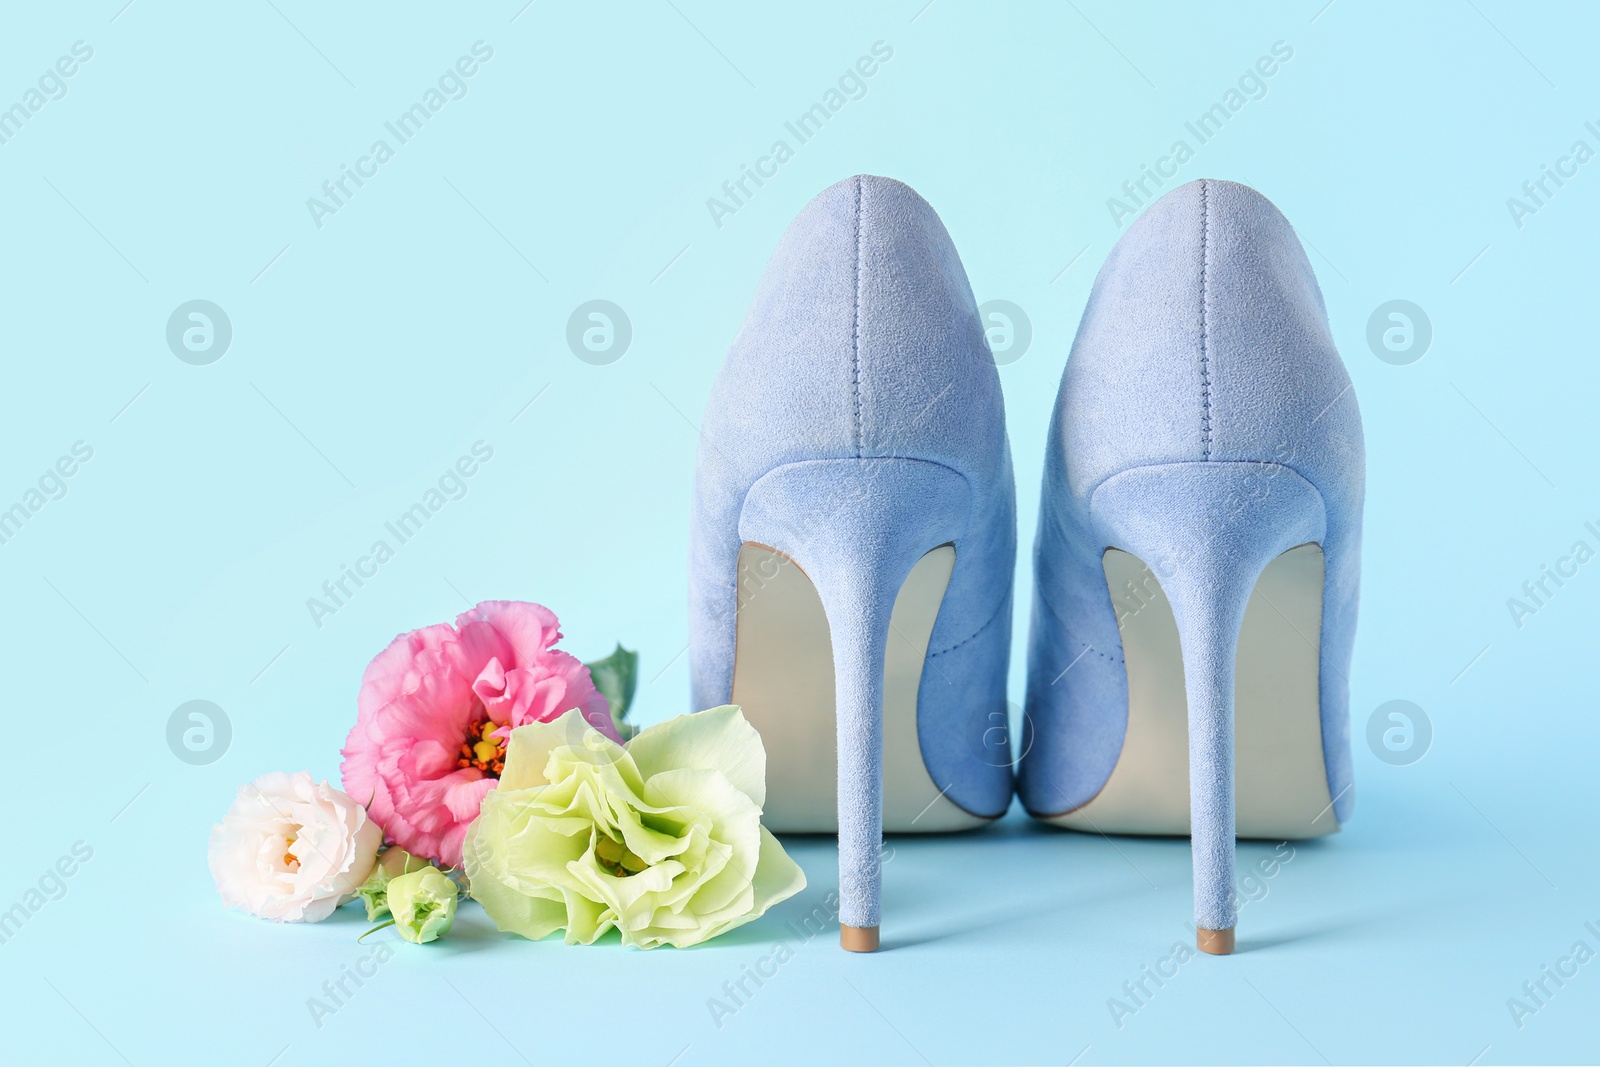 Photo of Stylish women's high heeled shoes and beautiful flowers on light blue background